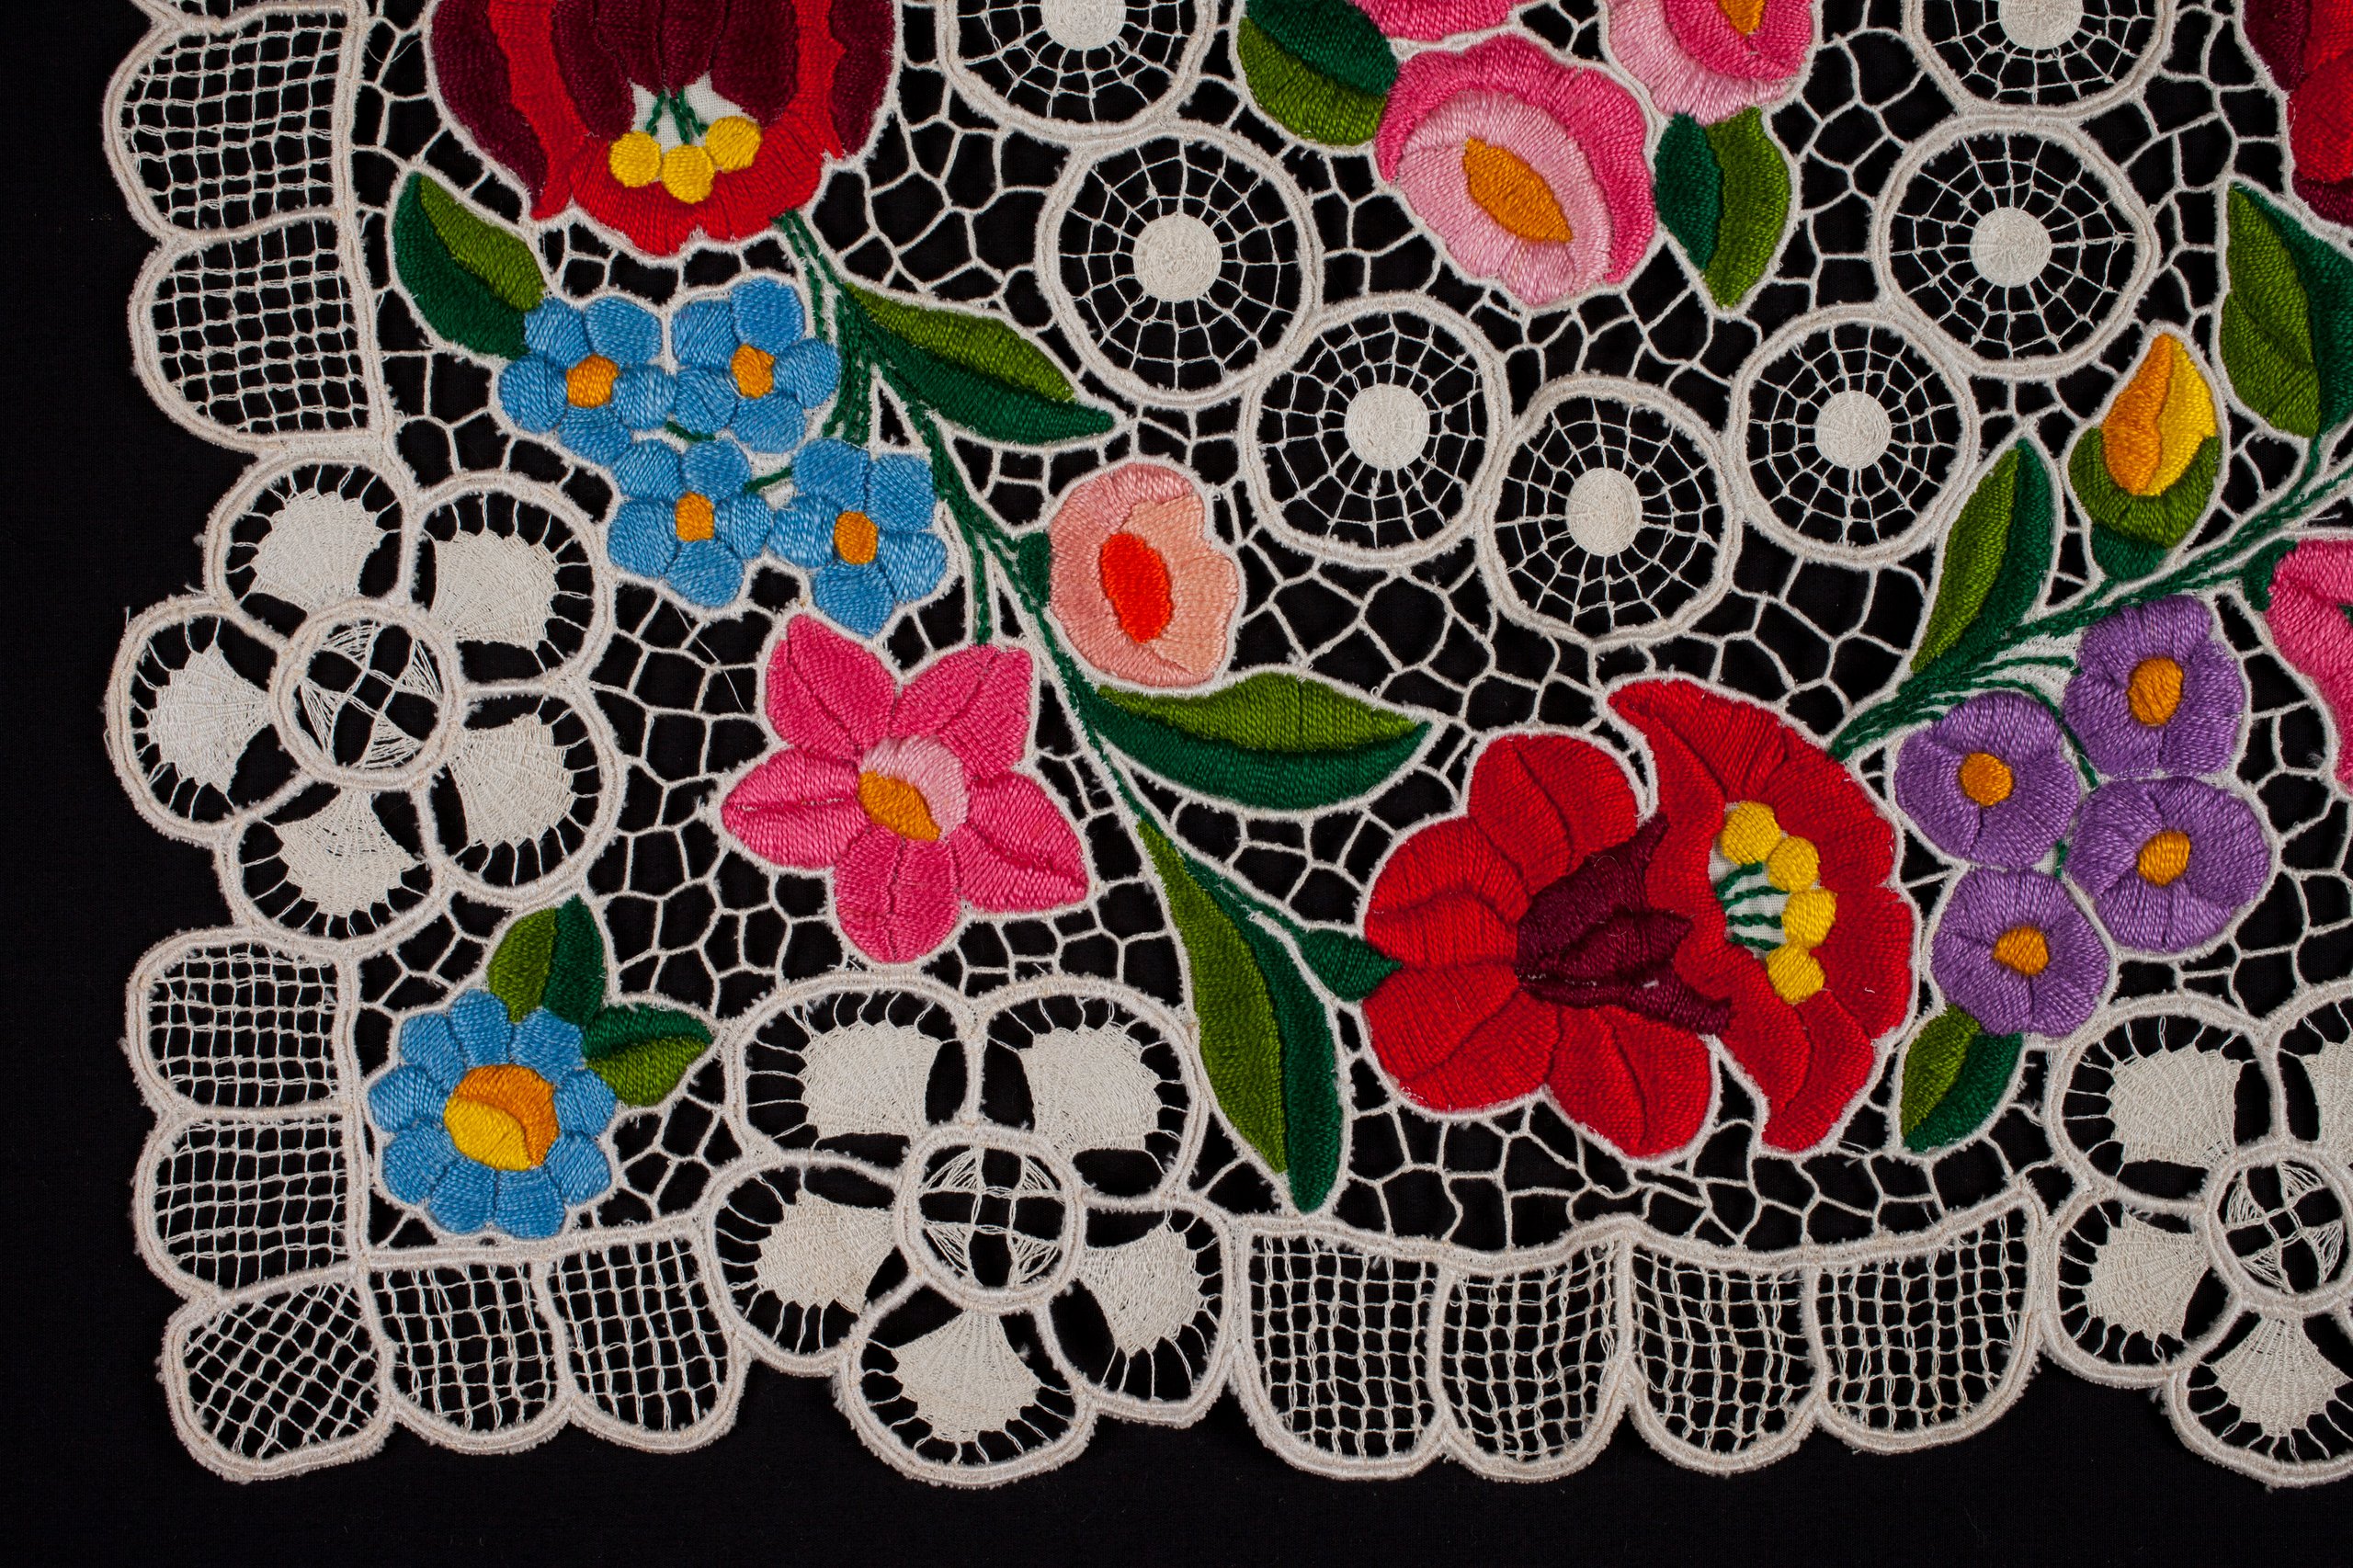 Powerhouse Collection - Kalocsa embroidered mat made in Hungary